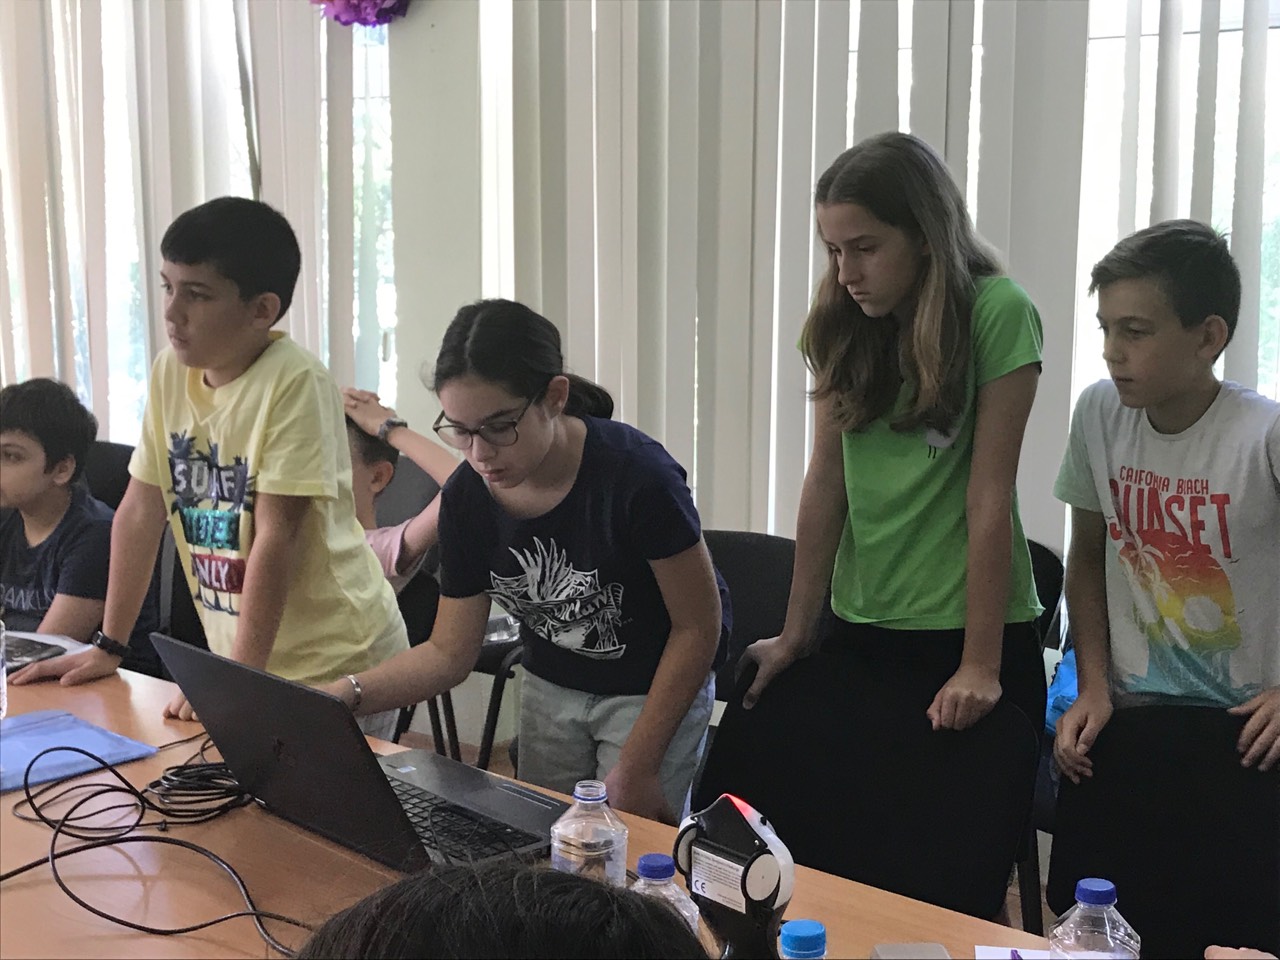 CyberSecurity for kids at varna free university